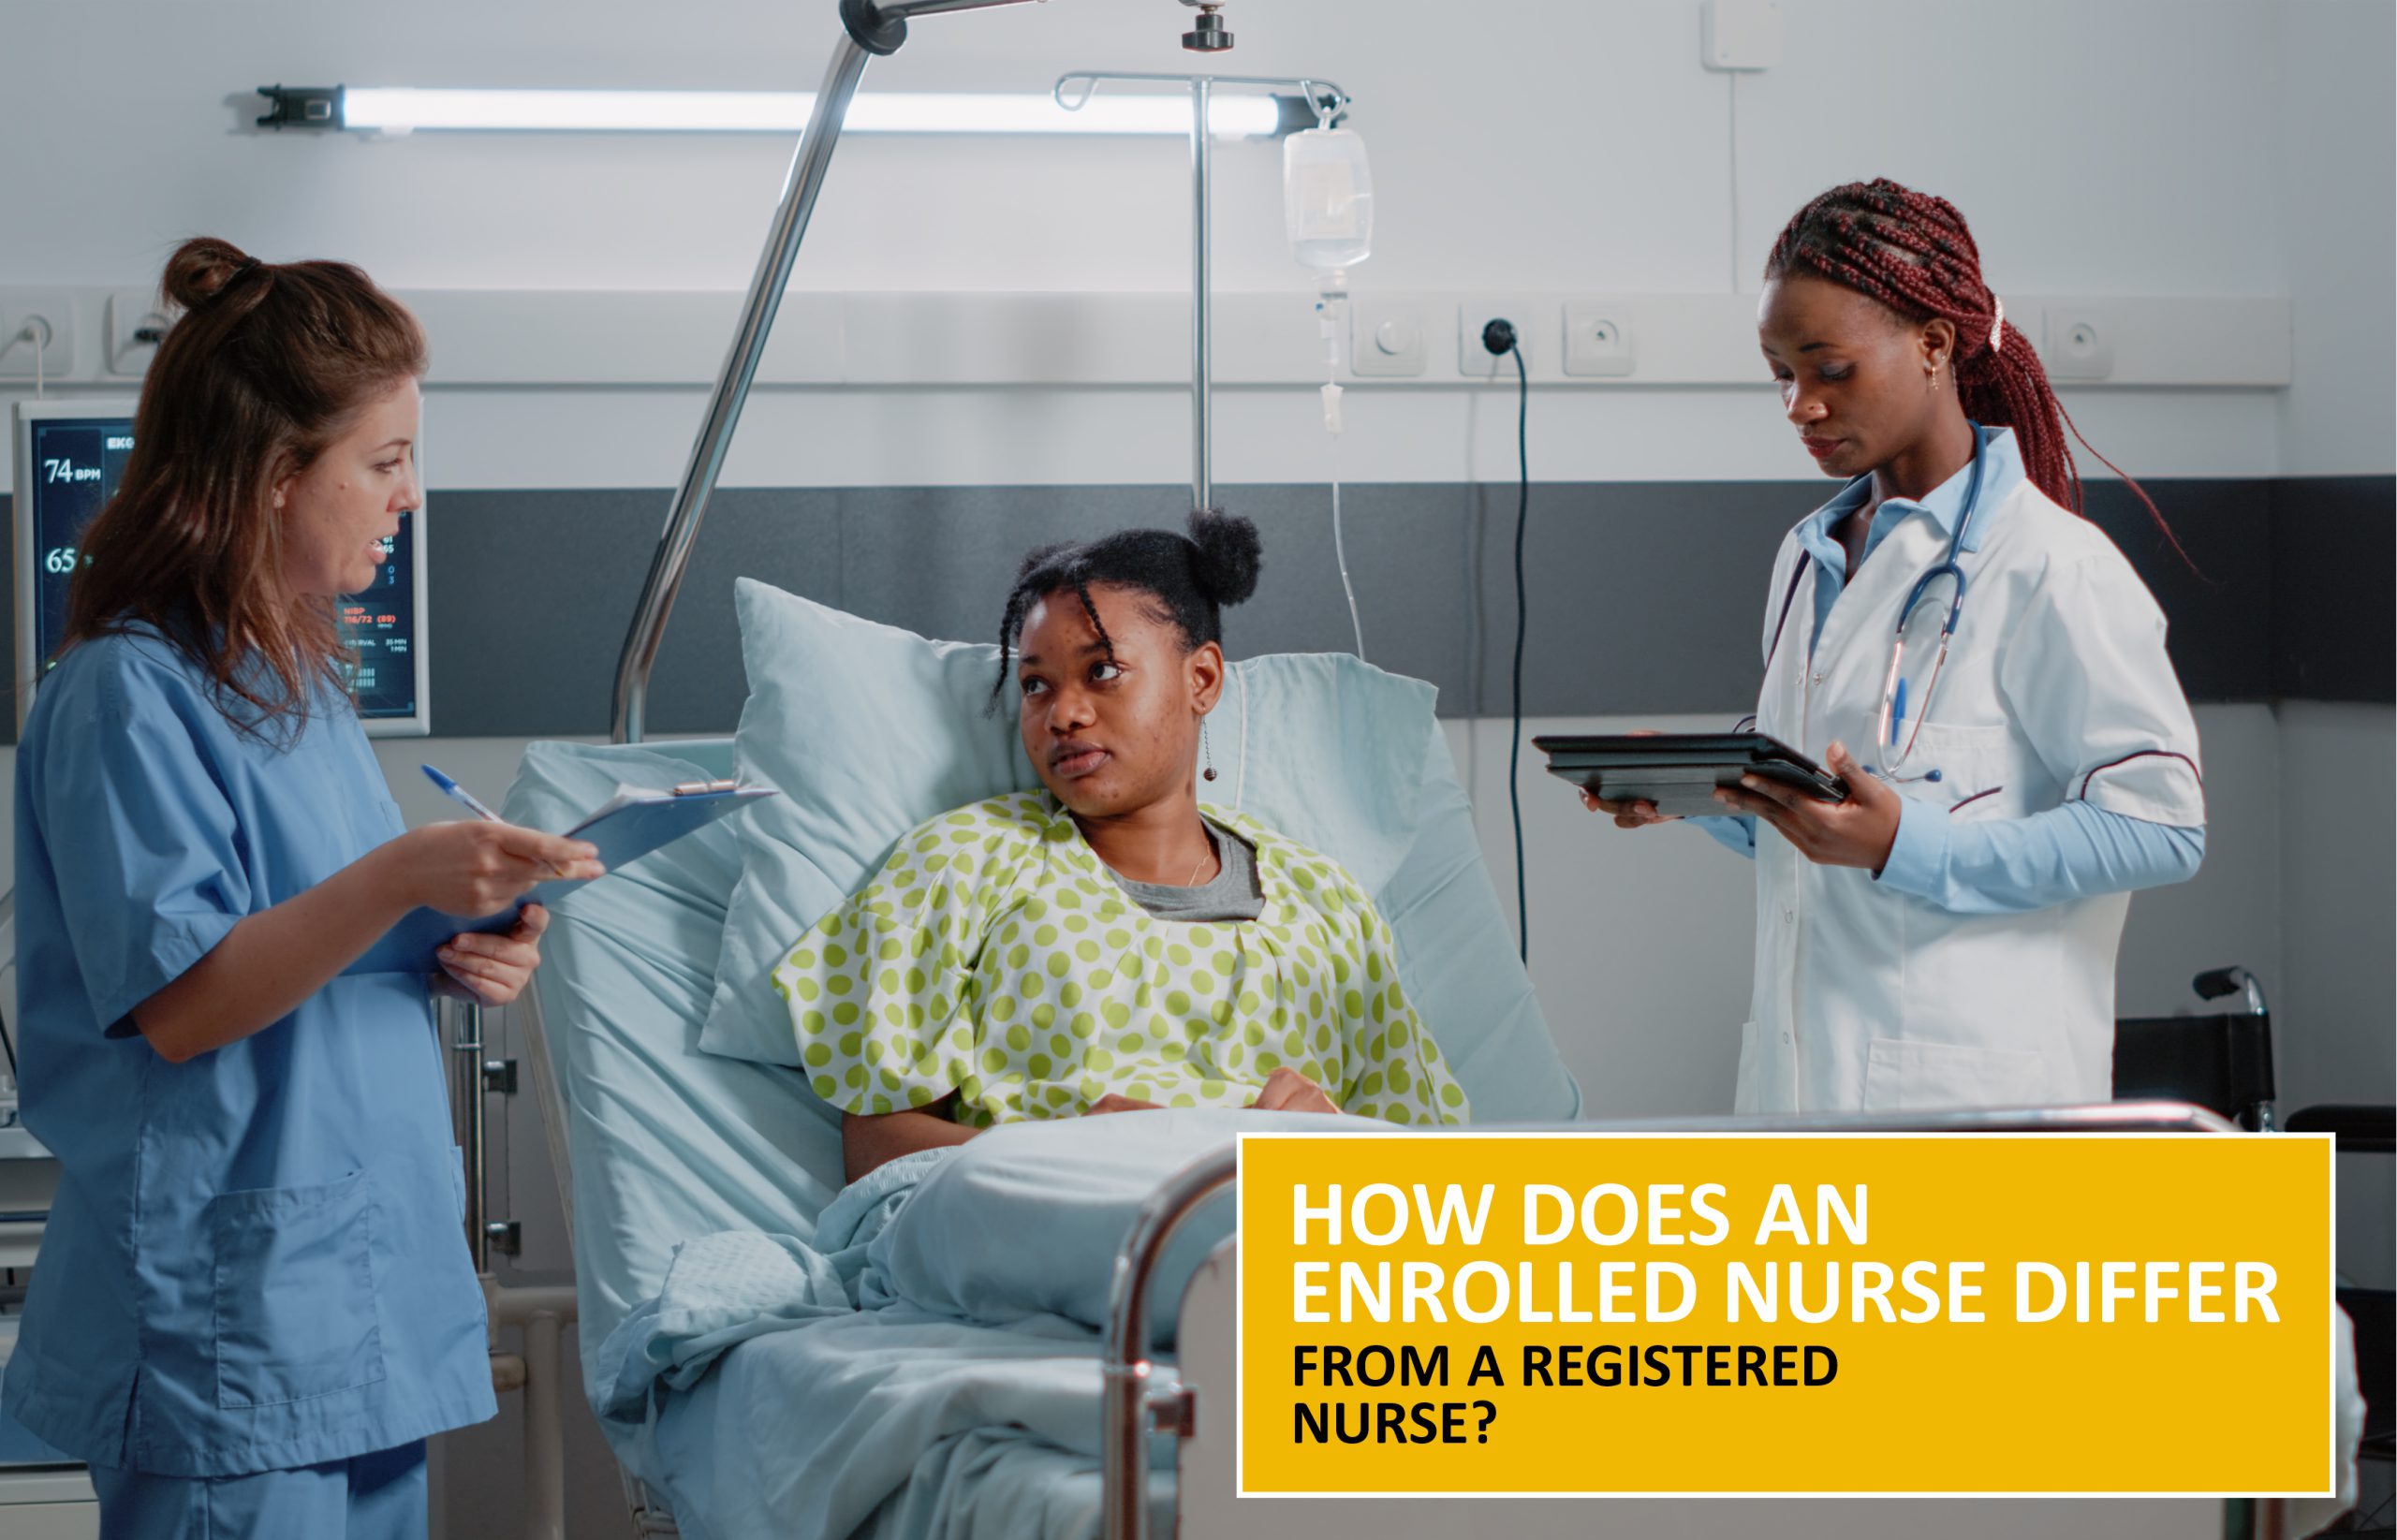 How Does an Enrolled Nurse Differ from a Registered Nurse?